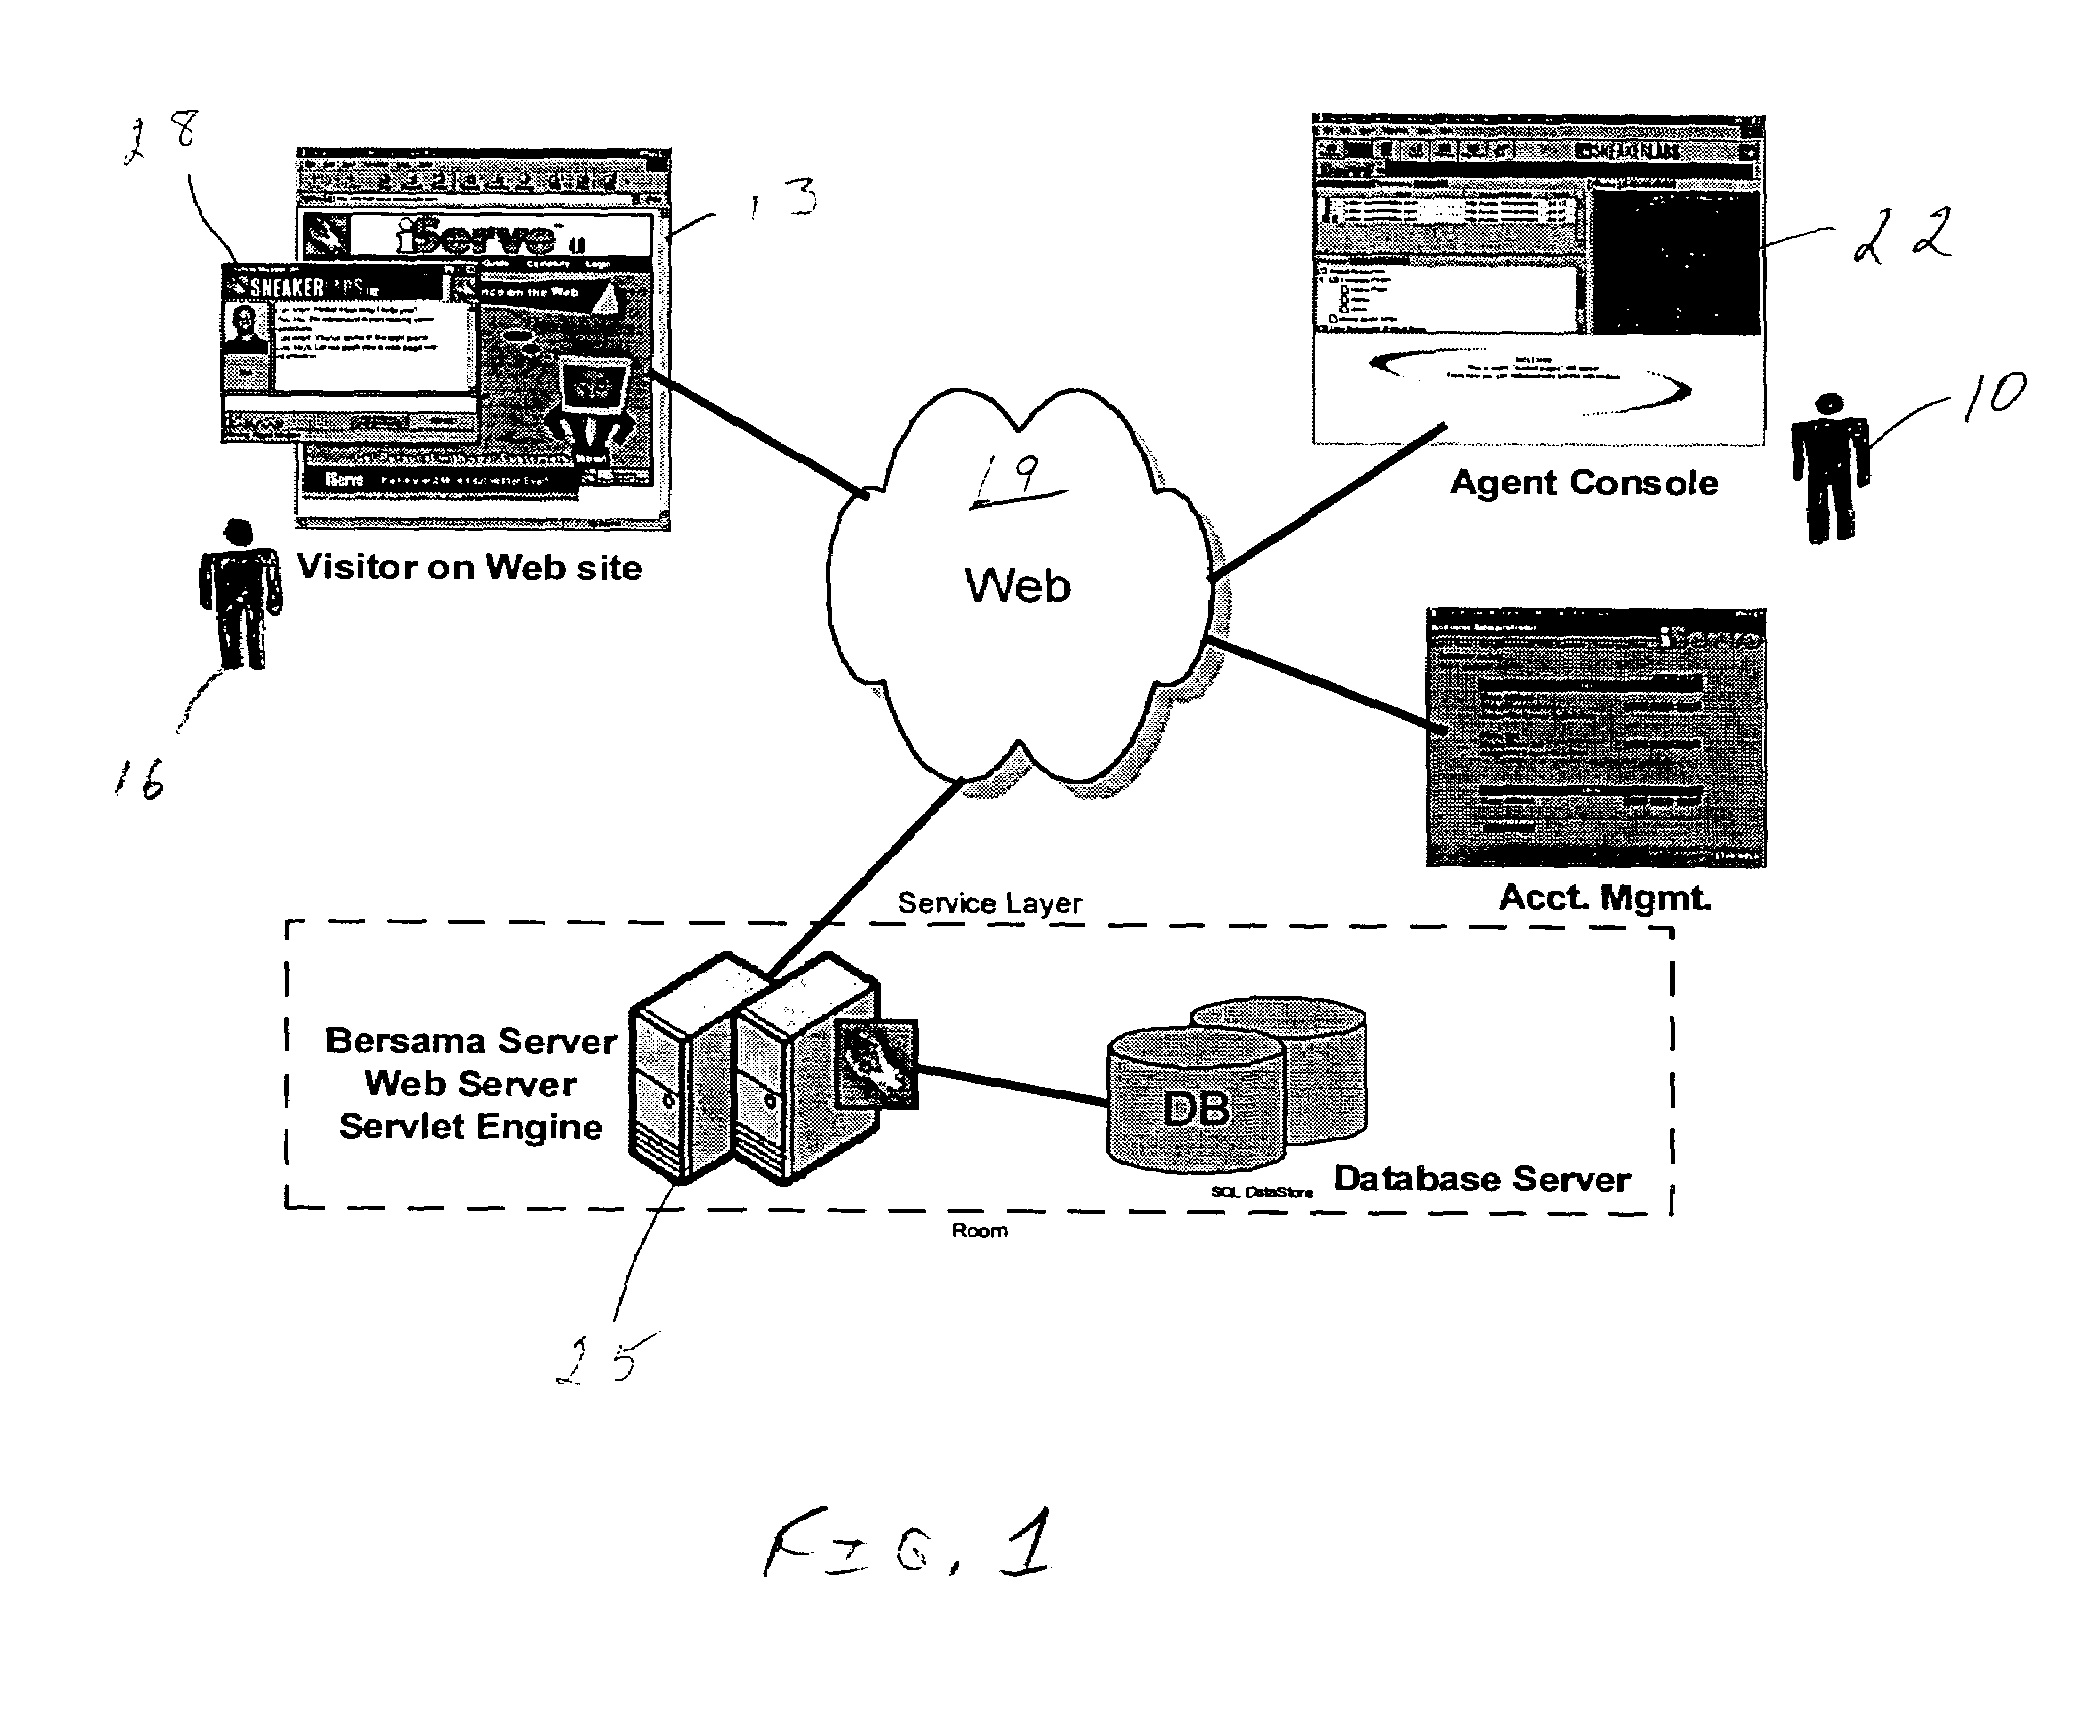 Apparatus and method for company representatives to monitor and establish live contact with visitors to their website